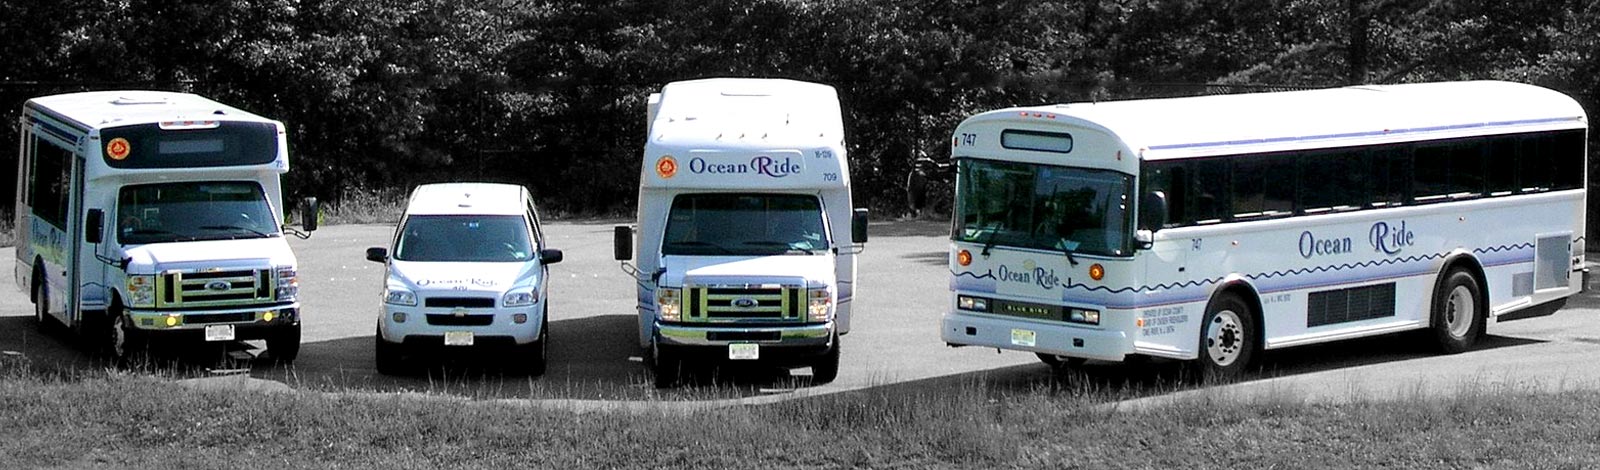 Different type of vehicles offered by Ocean Ride.